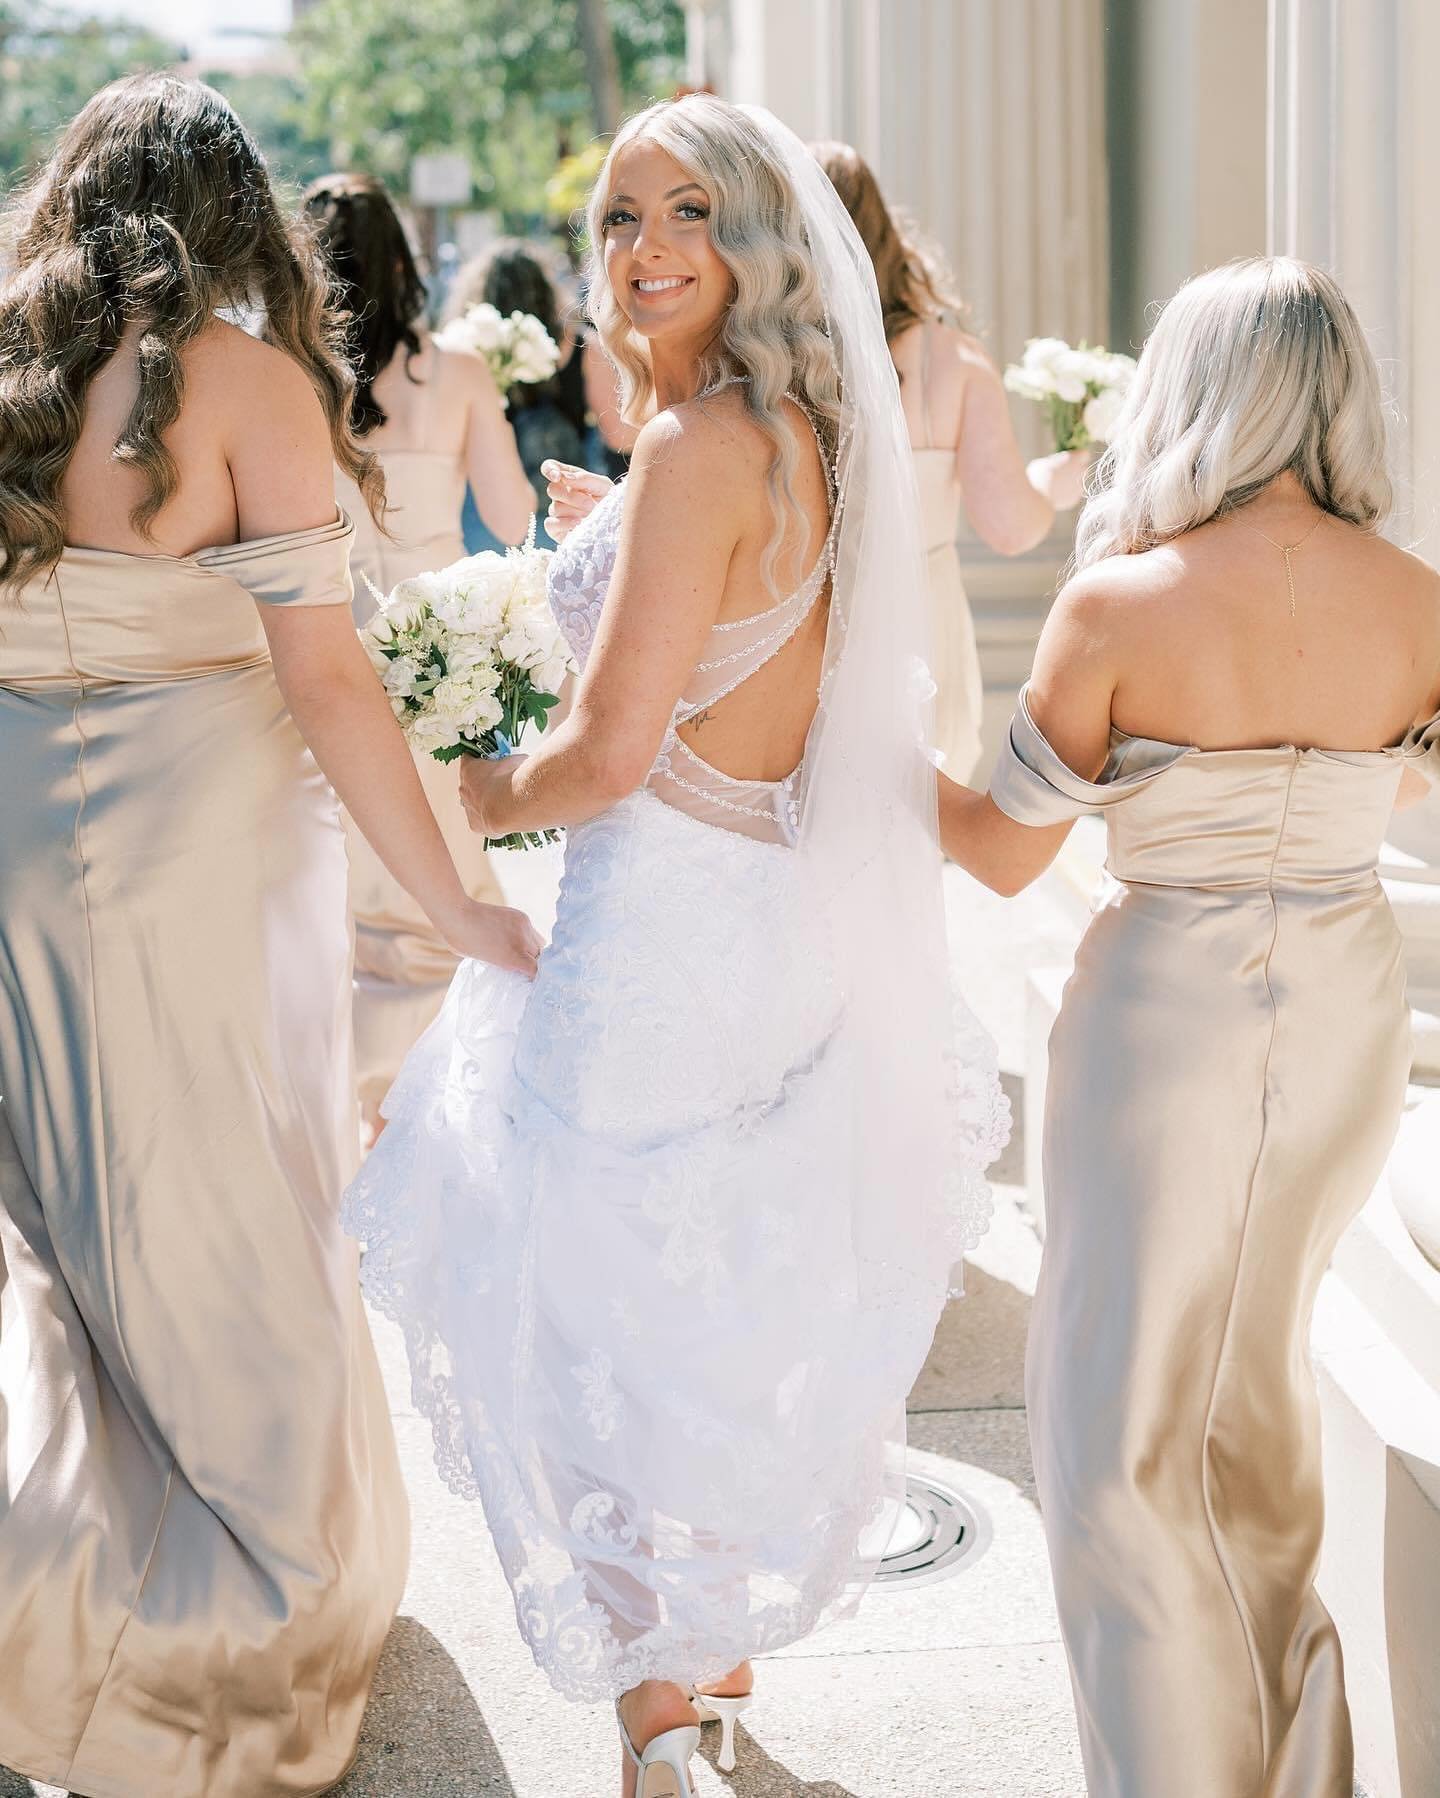 Alyson&rsquo;s wedding at the Treasury had bright champagne and gold accents, which allowed us to create a bright and sparkly look for makeup! ✨✨✨
Photographer @angelita_photo 
Venue @treasuryontheplaza 
Coordinator @coastalcelebrationsstaug 
Hair te